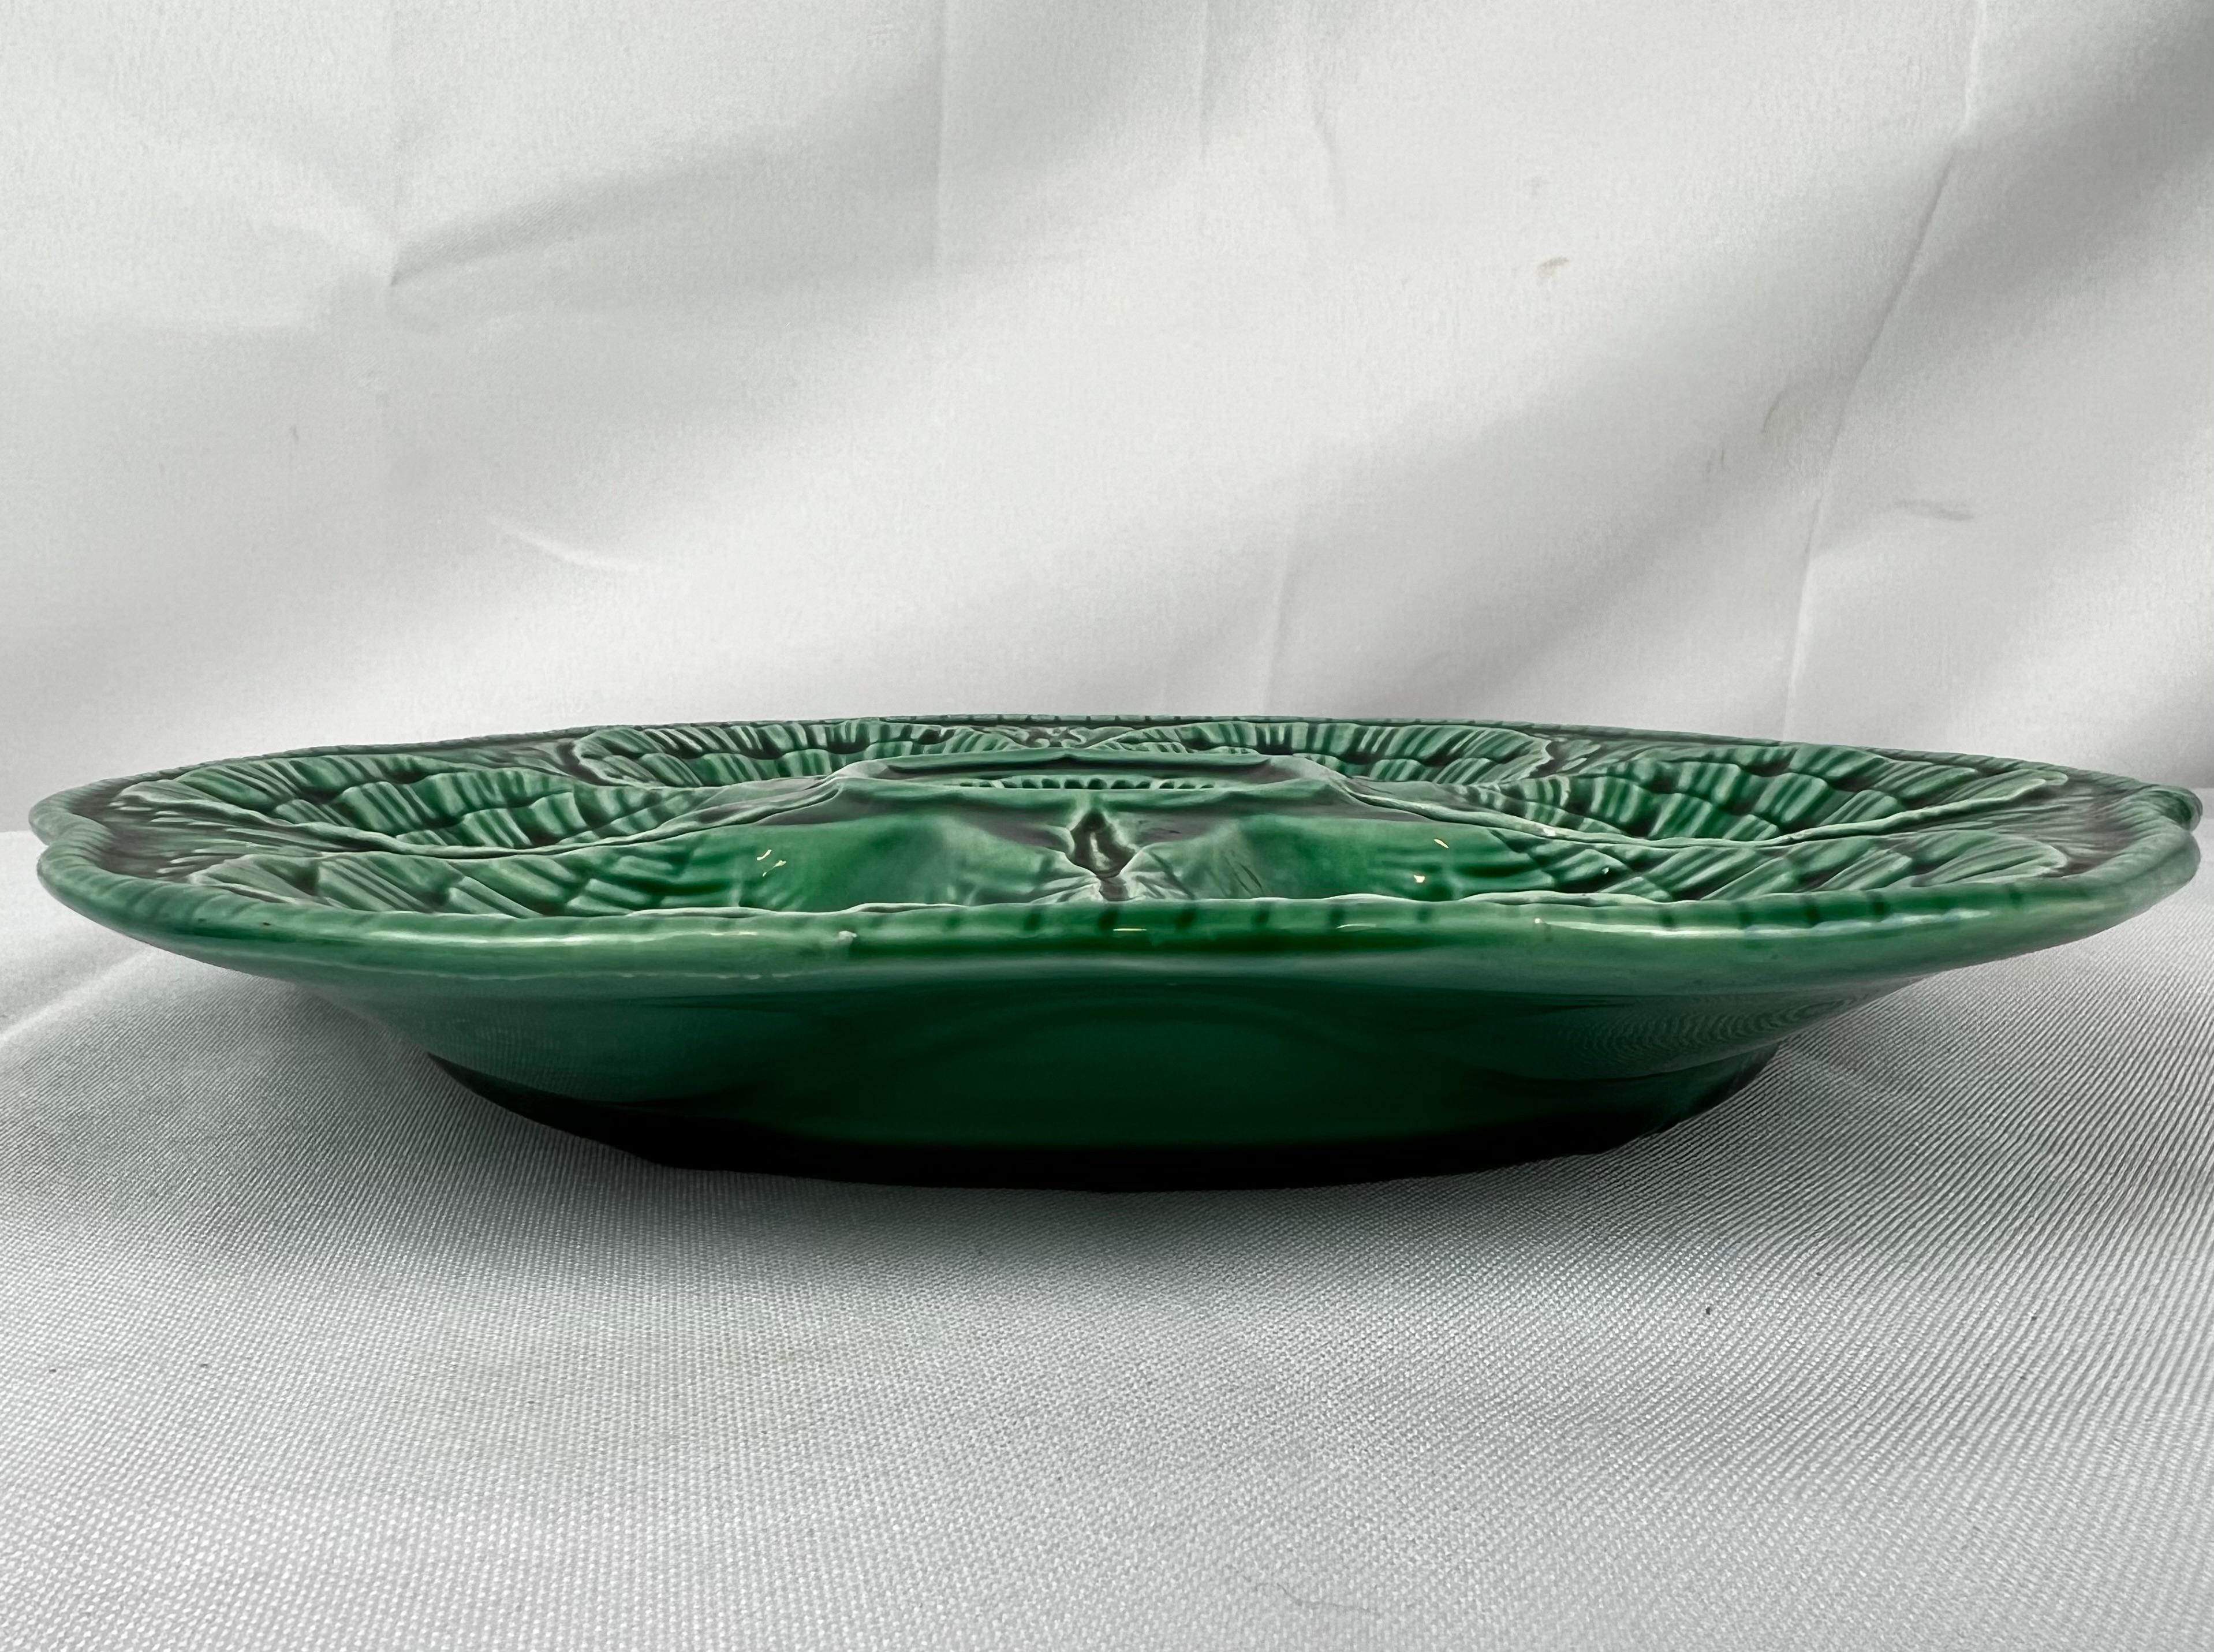 Green Majolica oyster plate by Sarreguemines, France 3